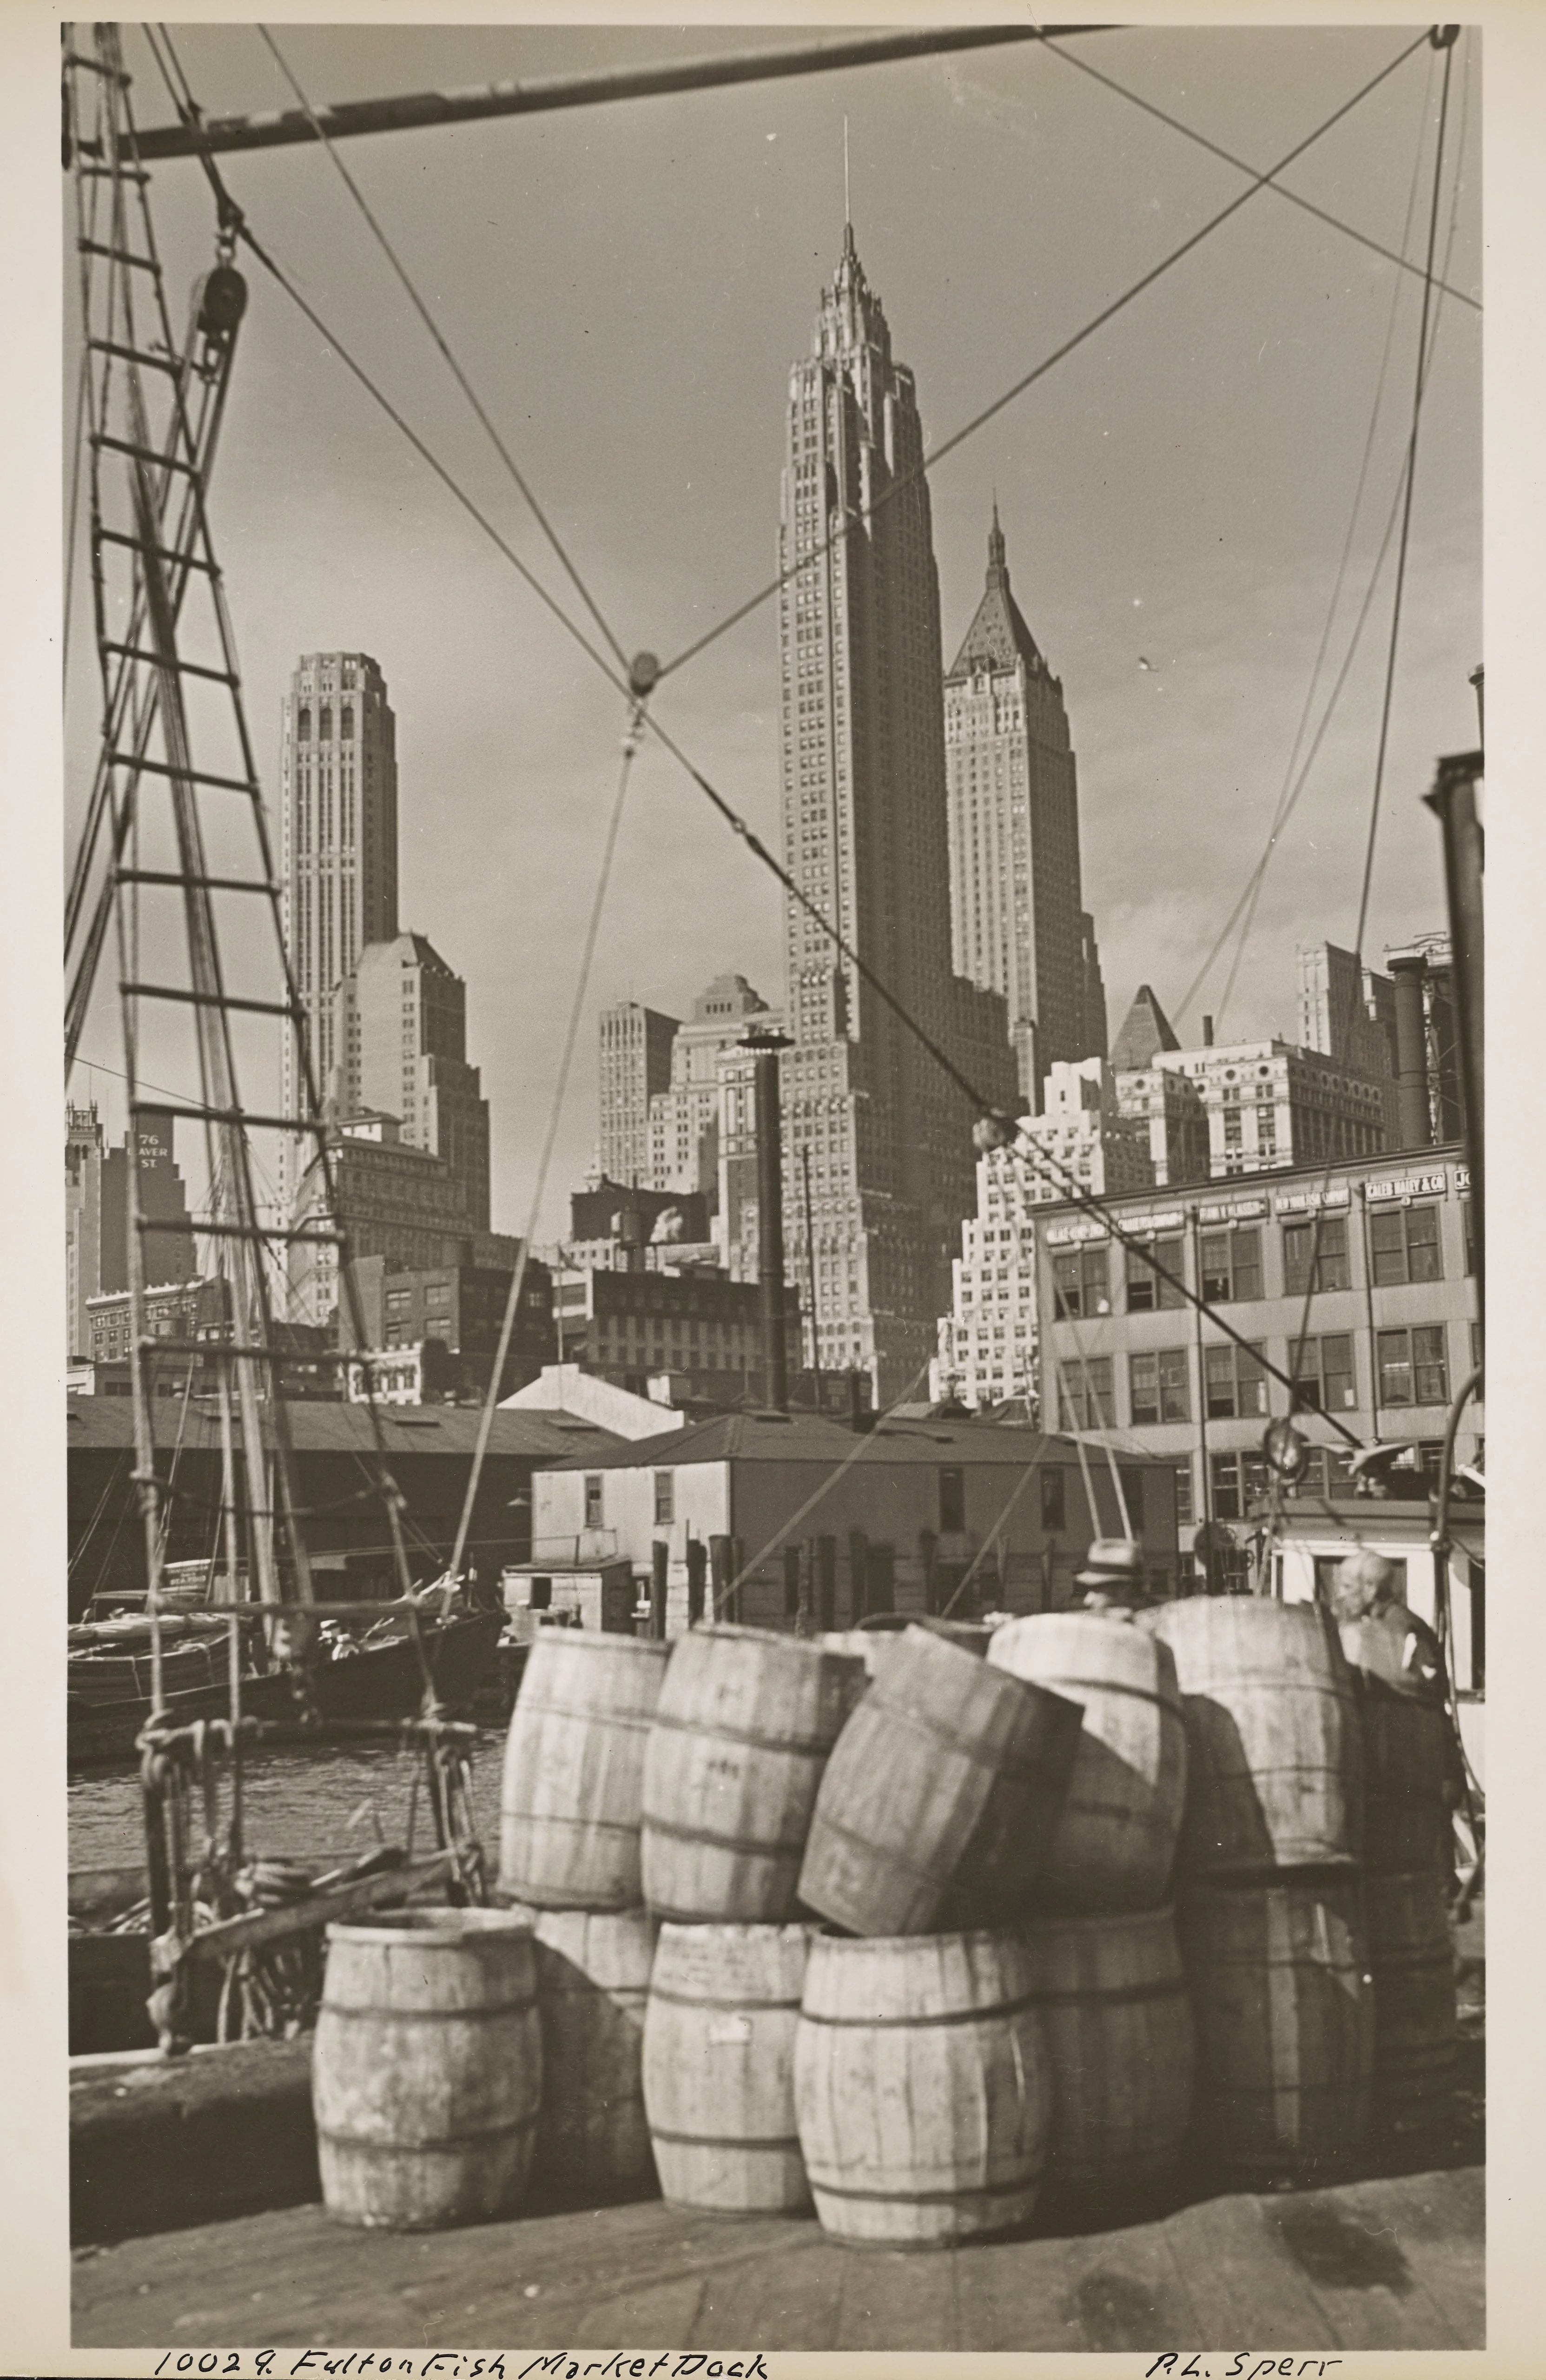 Barrels line the boardwalk, the New York skyline towers in the background.